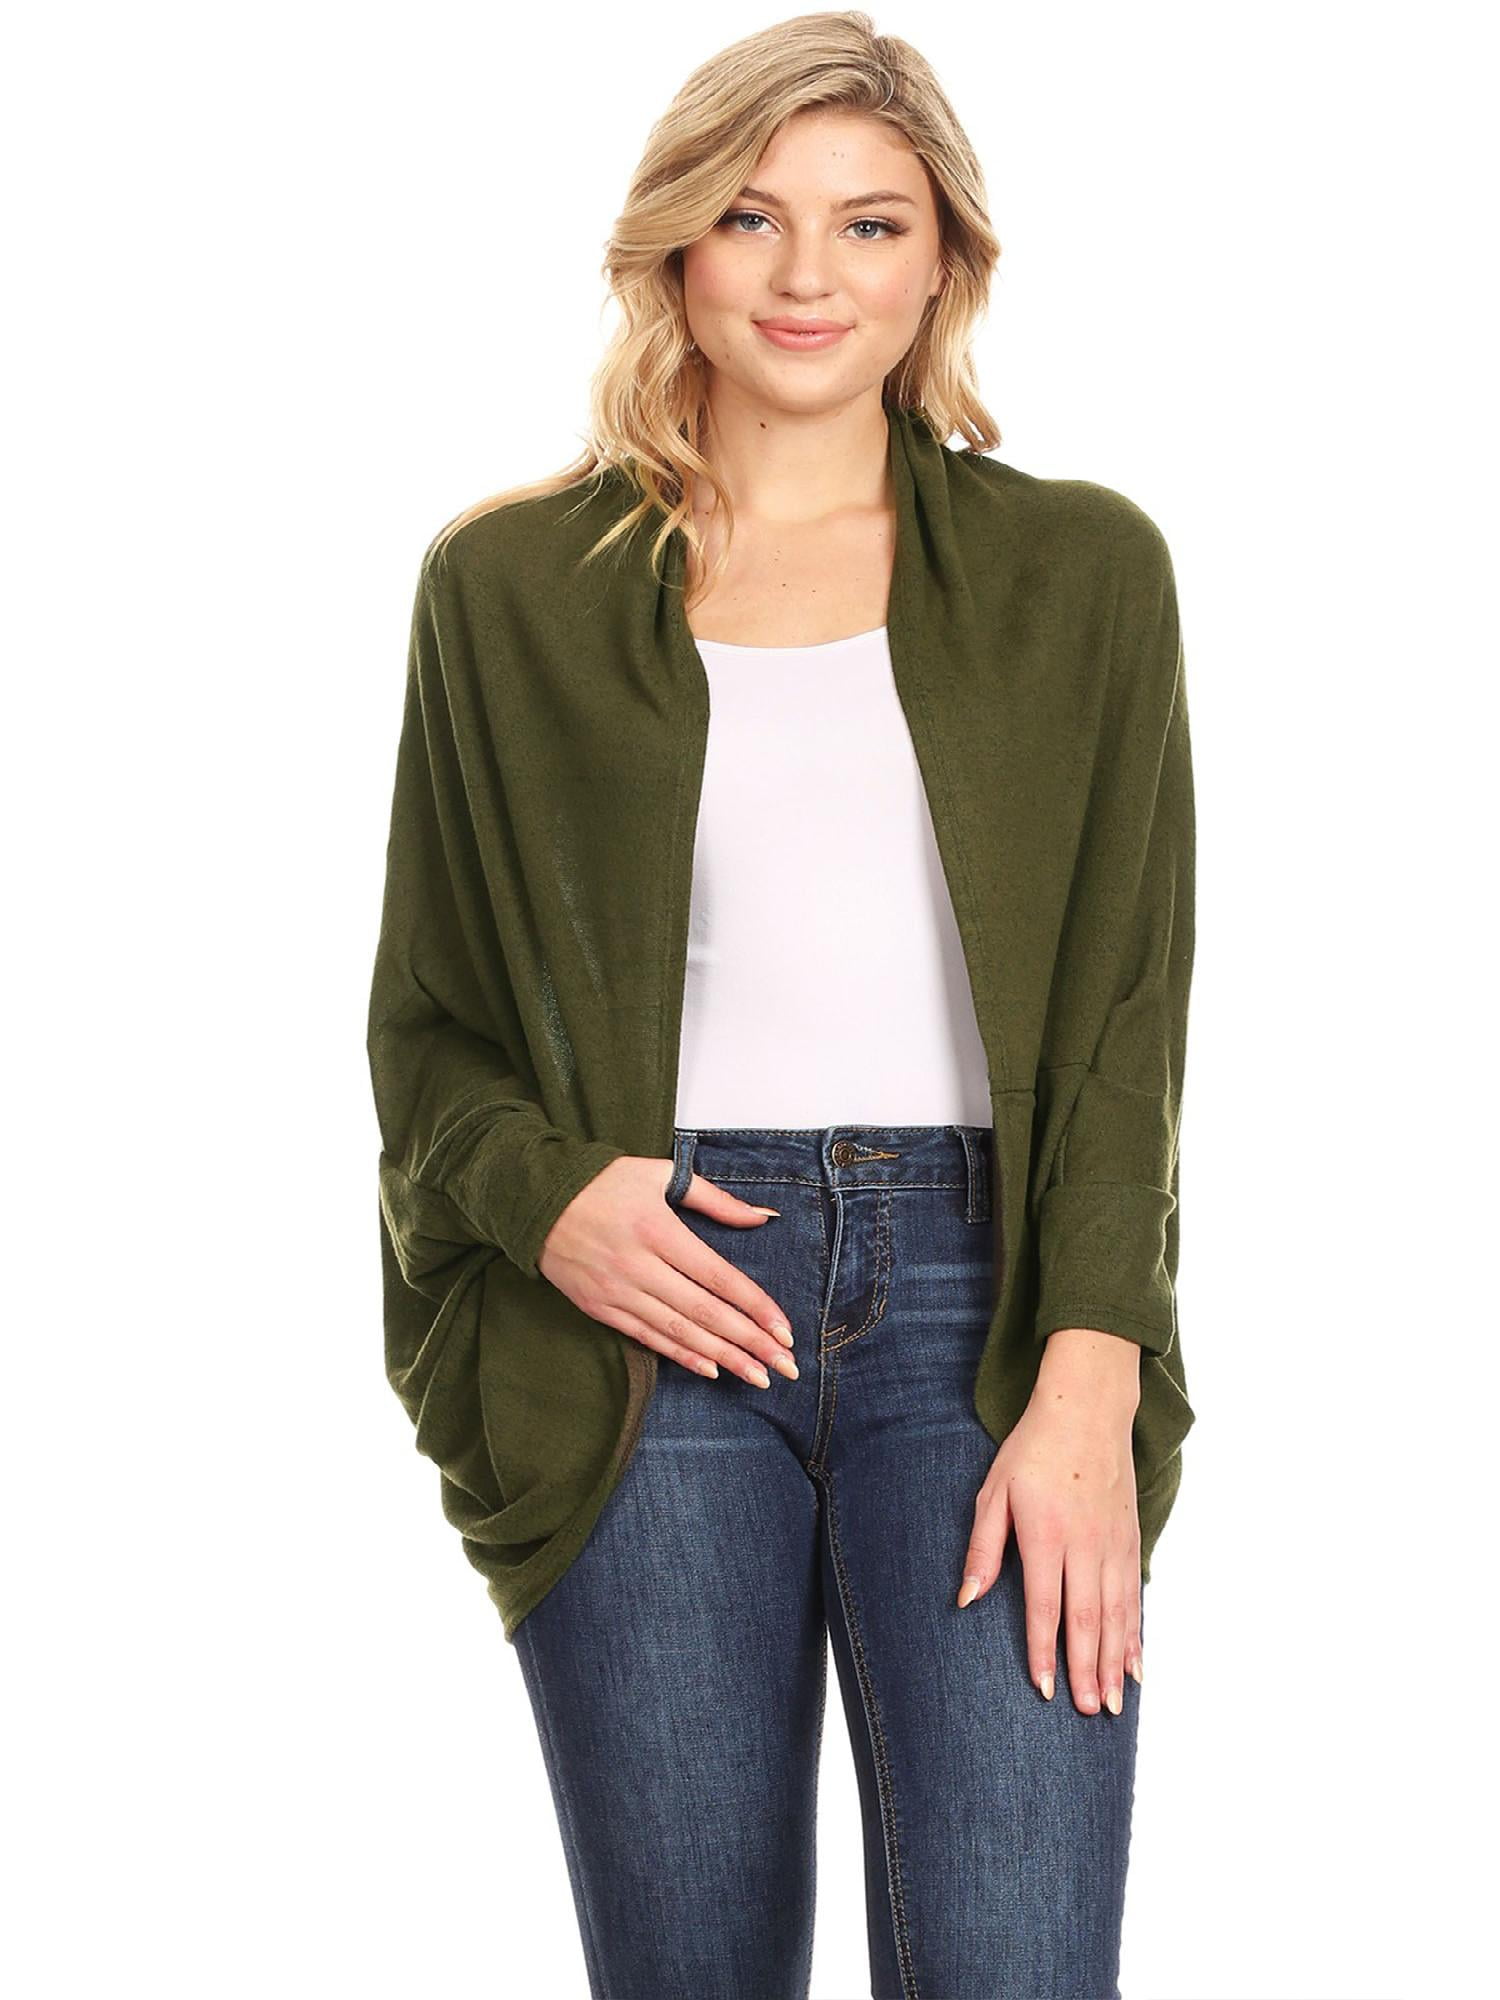 Tocco Reale Women's Space Dyed Open Cardigan Sweater - Walmart.com